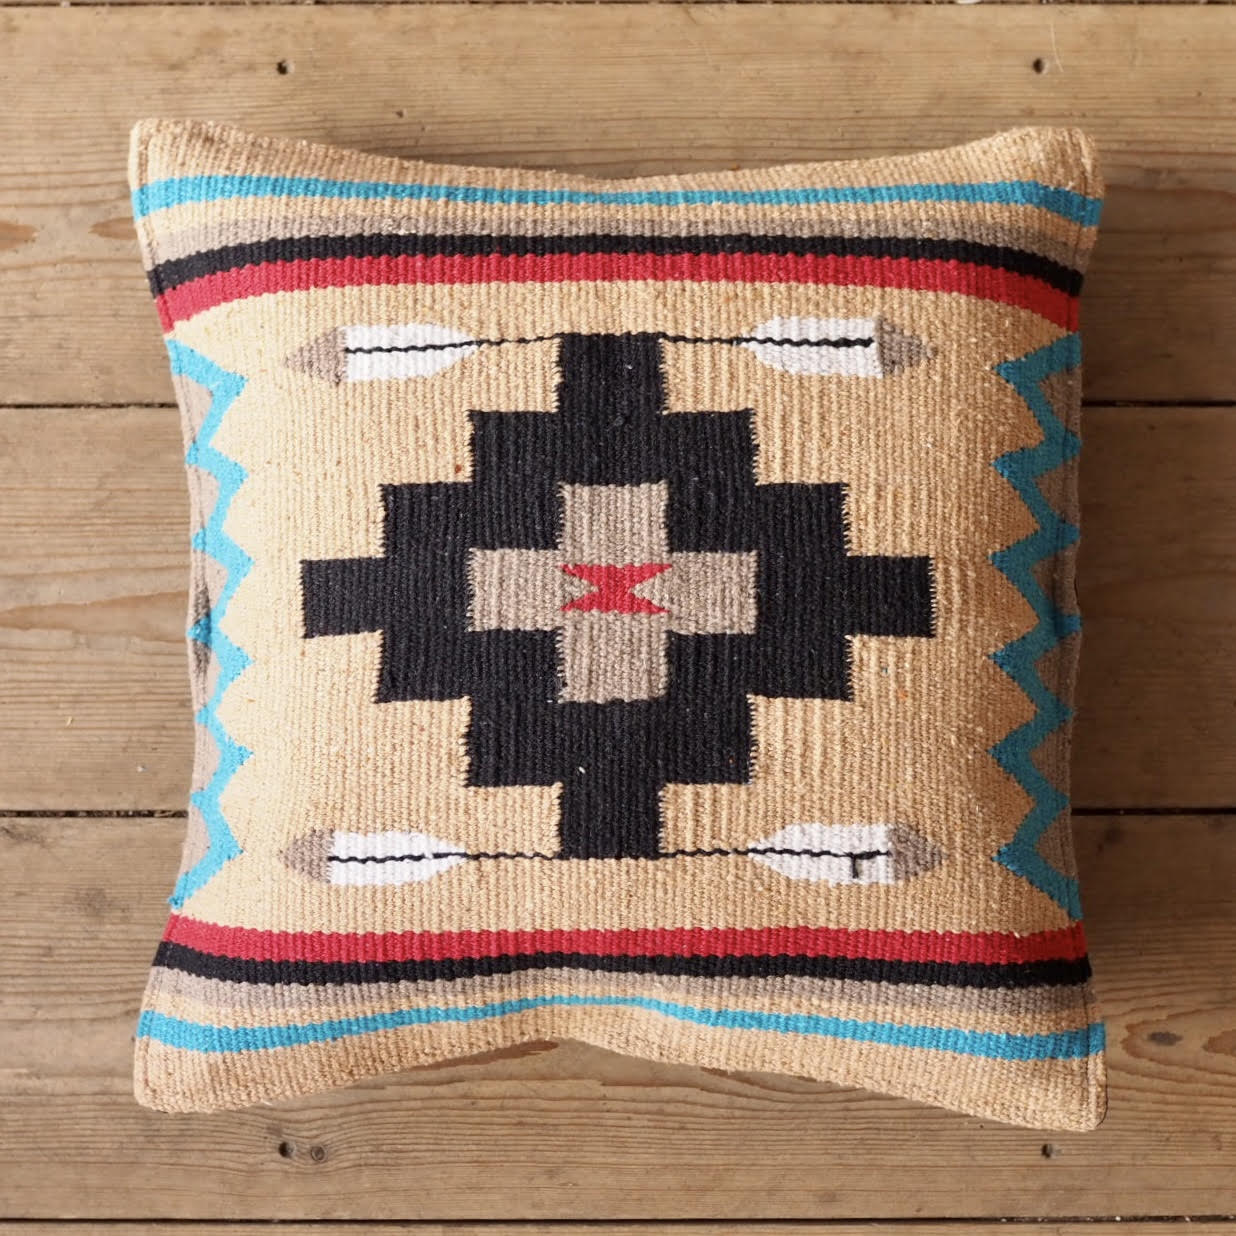 Hi Cacti Sand Zapotec Style Woven Cushion + Duck Feather Insert